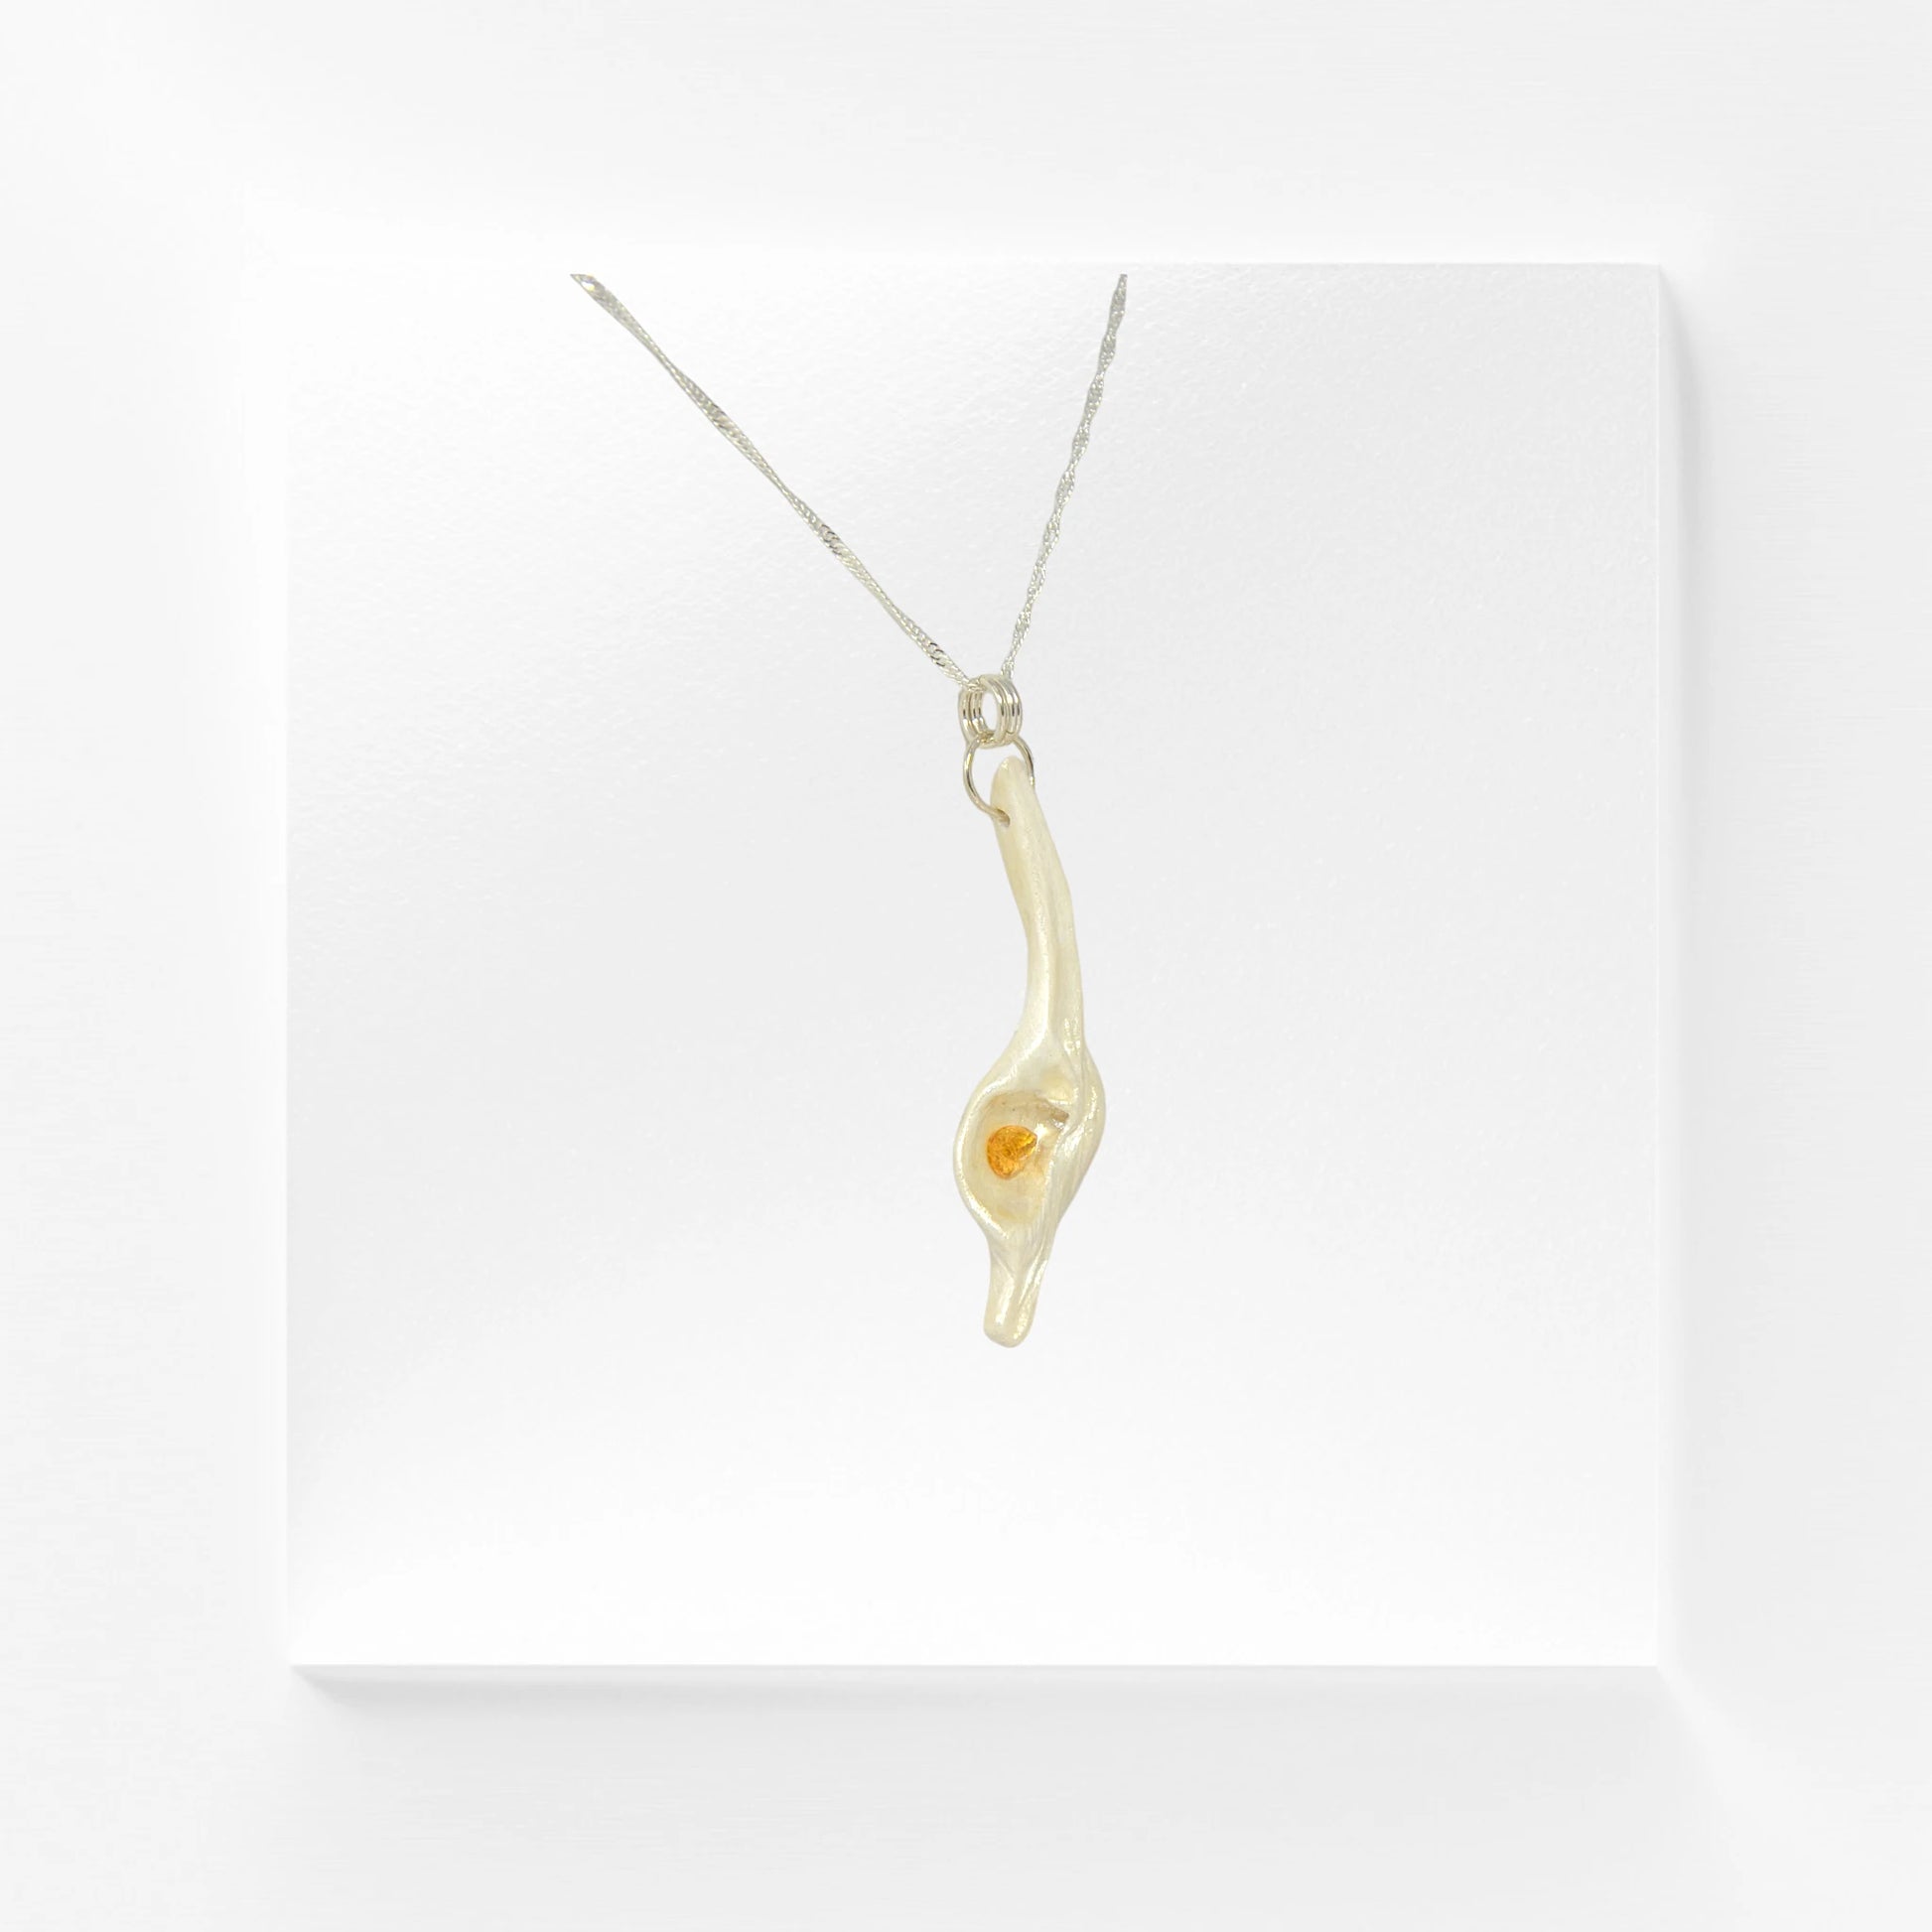 Sun Star natural seashell pendant with a beautiful pear shaped rose cut Citrine. The pendant is turned so the viewer can see the right side of the pendant.